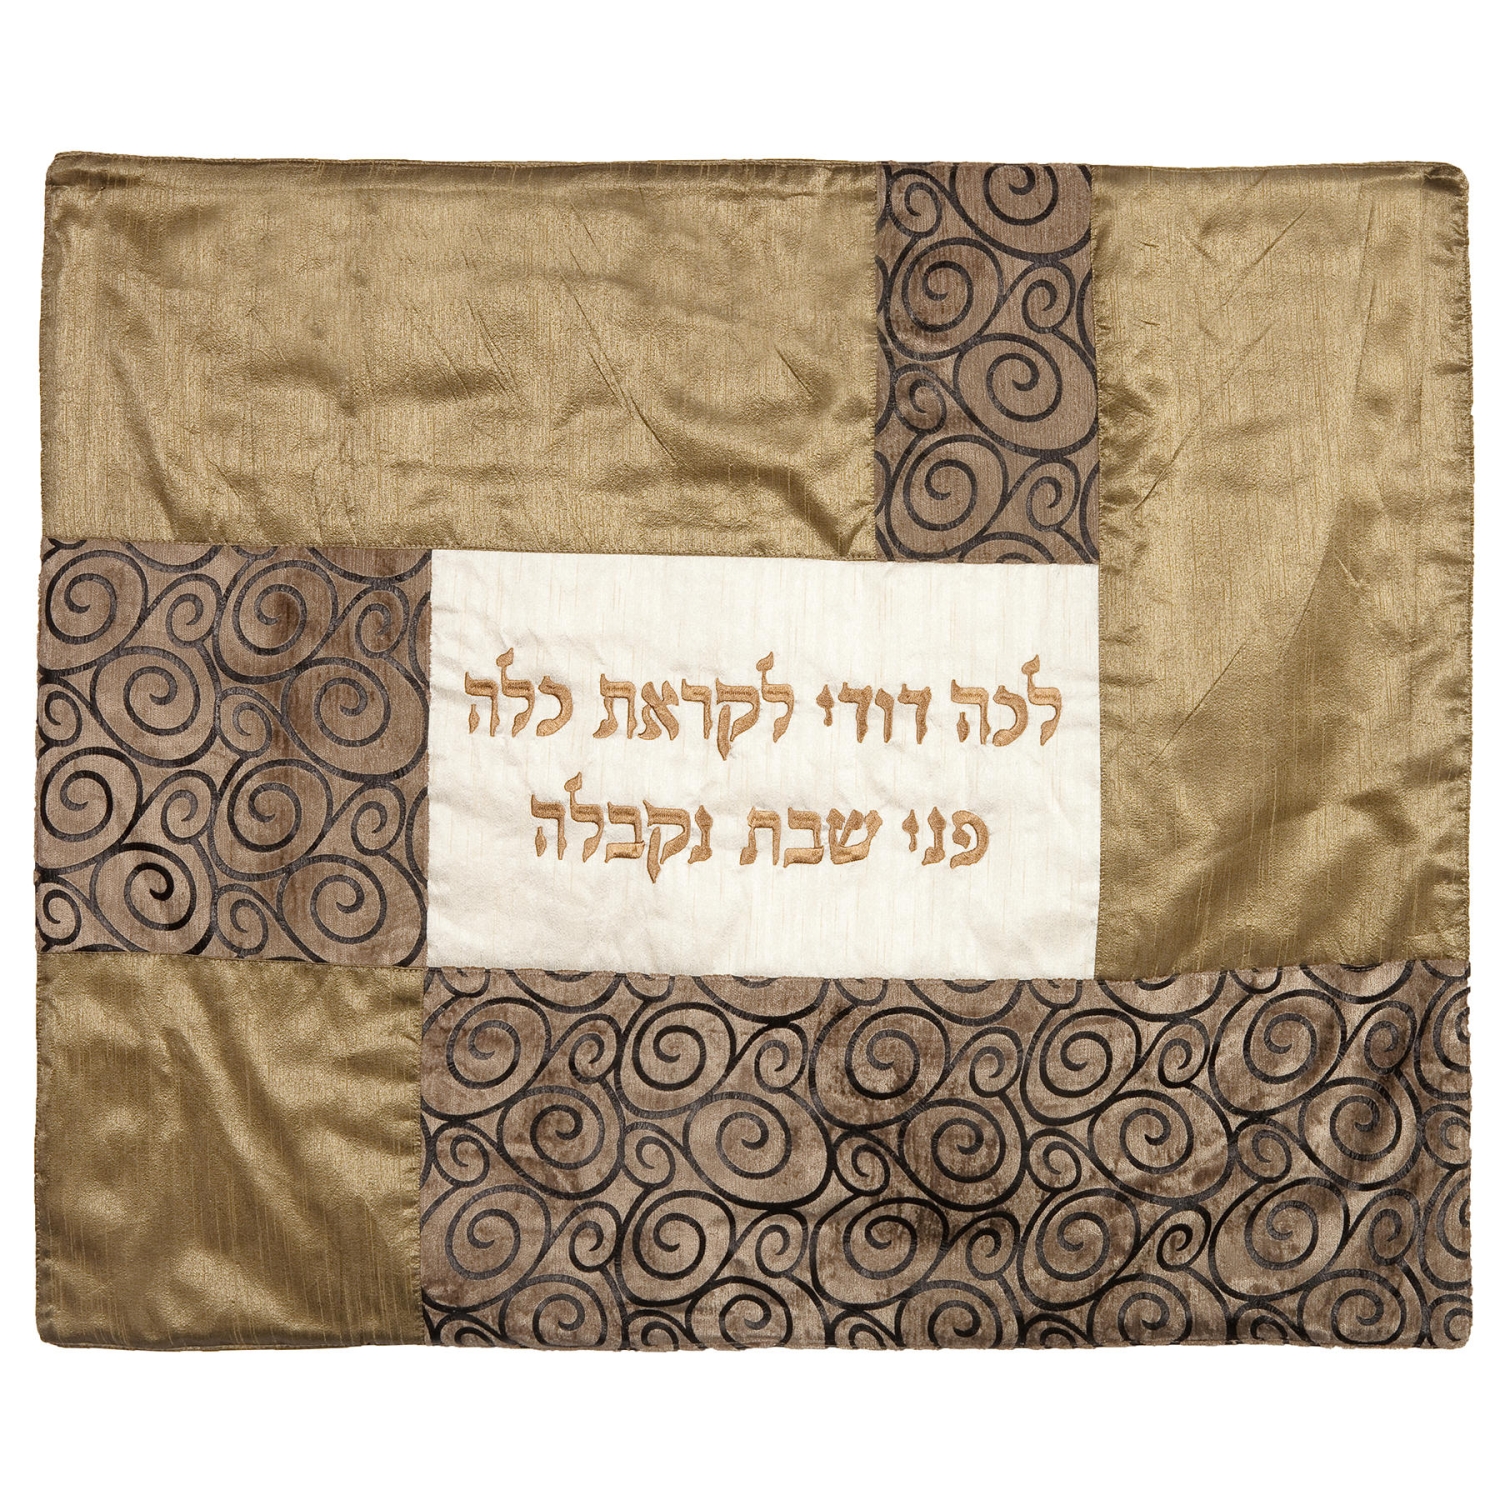 Yair Emanuel Embroidered Plata Cover (Hot Plate Cover) - Fabric Collage - Brown Ornament - 1